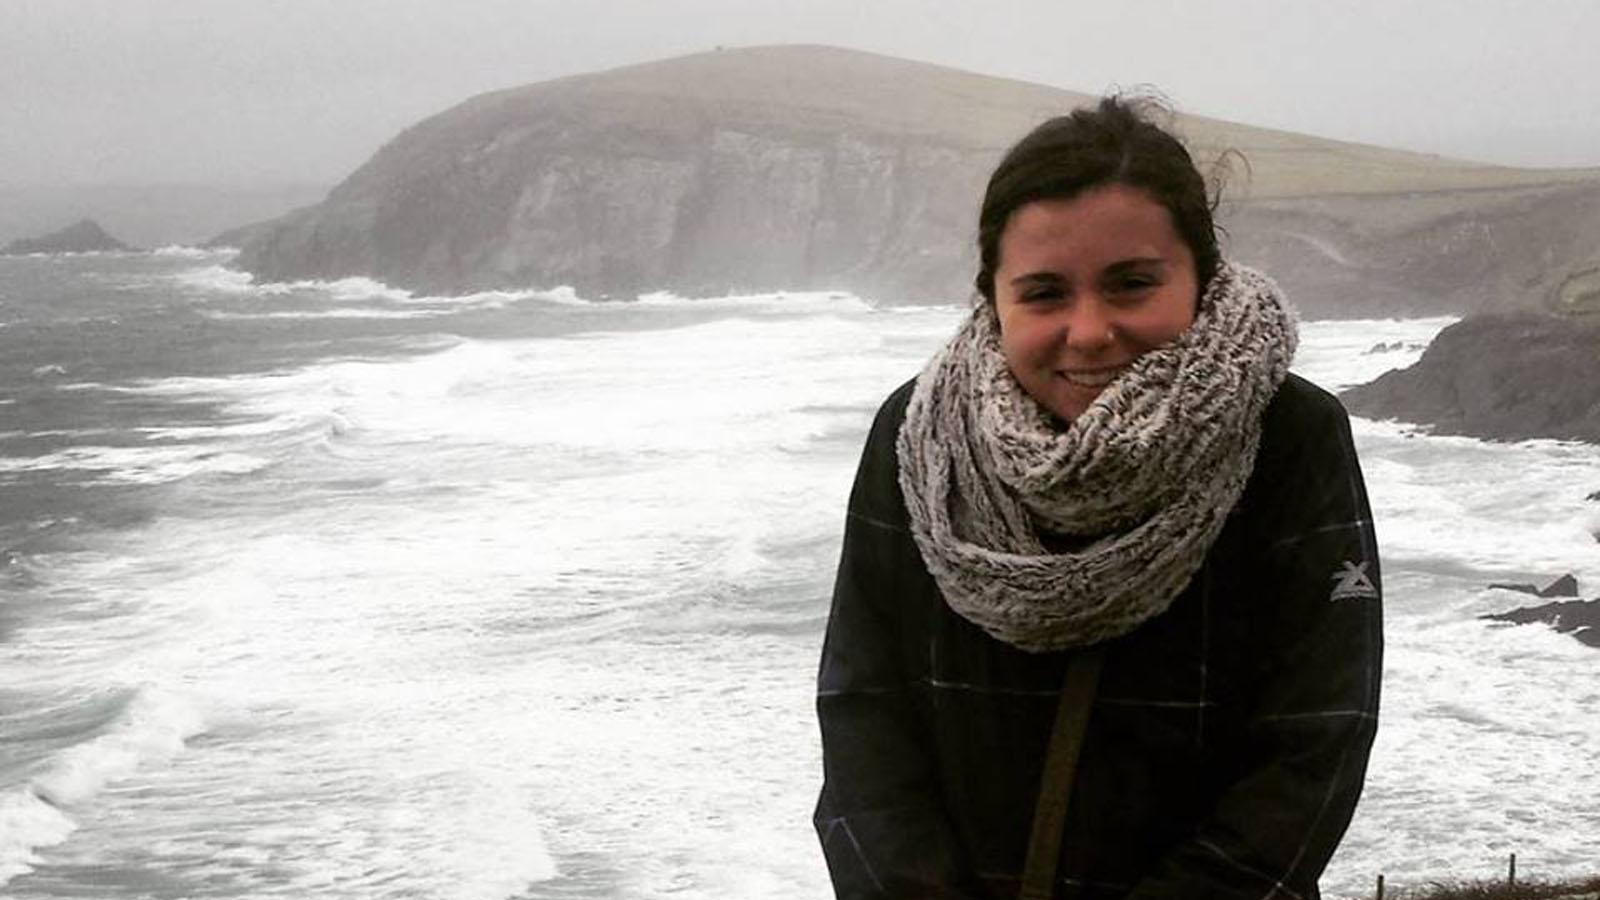 Lubin student Wendy Smith '16 semester abroad in Ireland trip photo